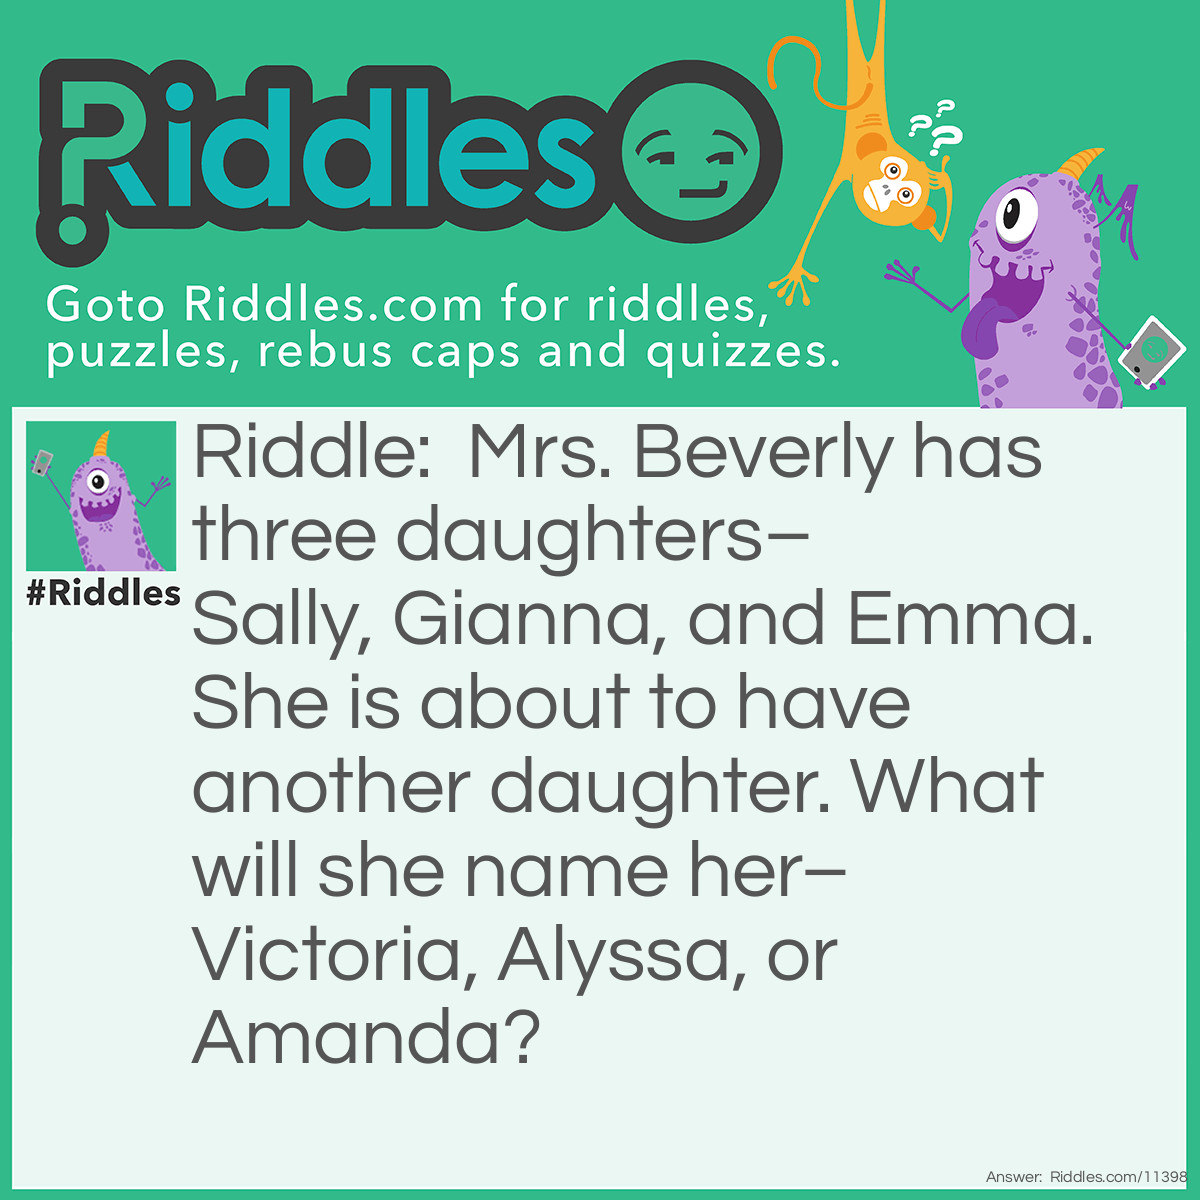 Riddle: Mrs. Beverly has three daughters–Sally, Gianna, and Emma. She is about to have another daughter. What will she name her–Victoria, Alyssa, or Amanda? Answer: Mrs. Beverly will name her next daughter Alyssa; the names of her other three daughters each contain a double letter. Alyssa's name has a double letter ("s"), unlike the other two.